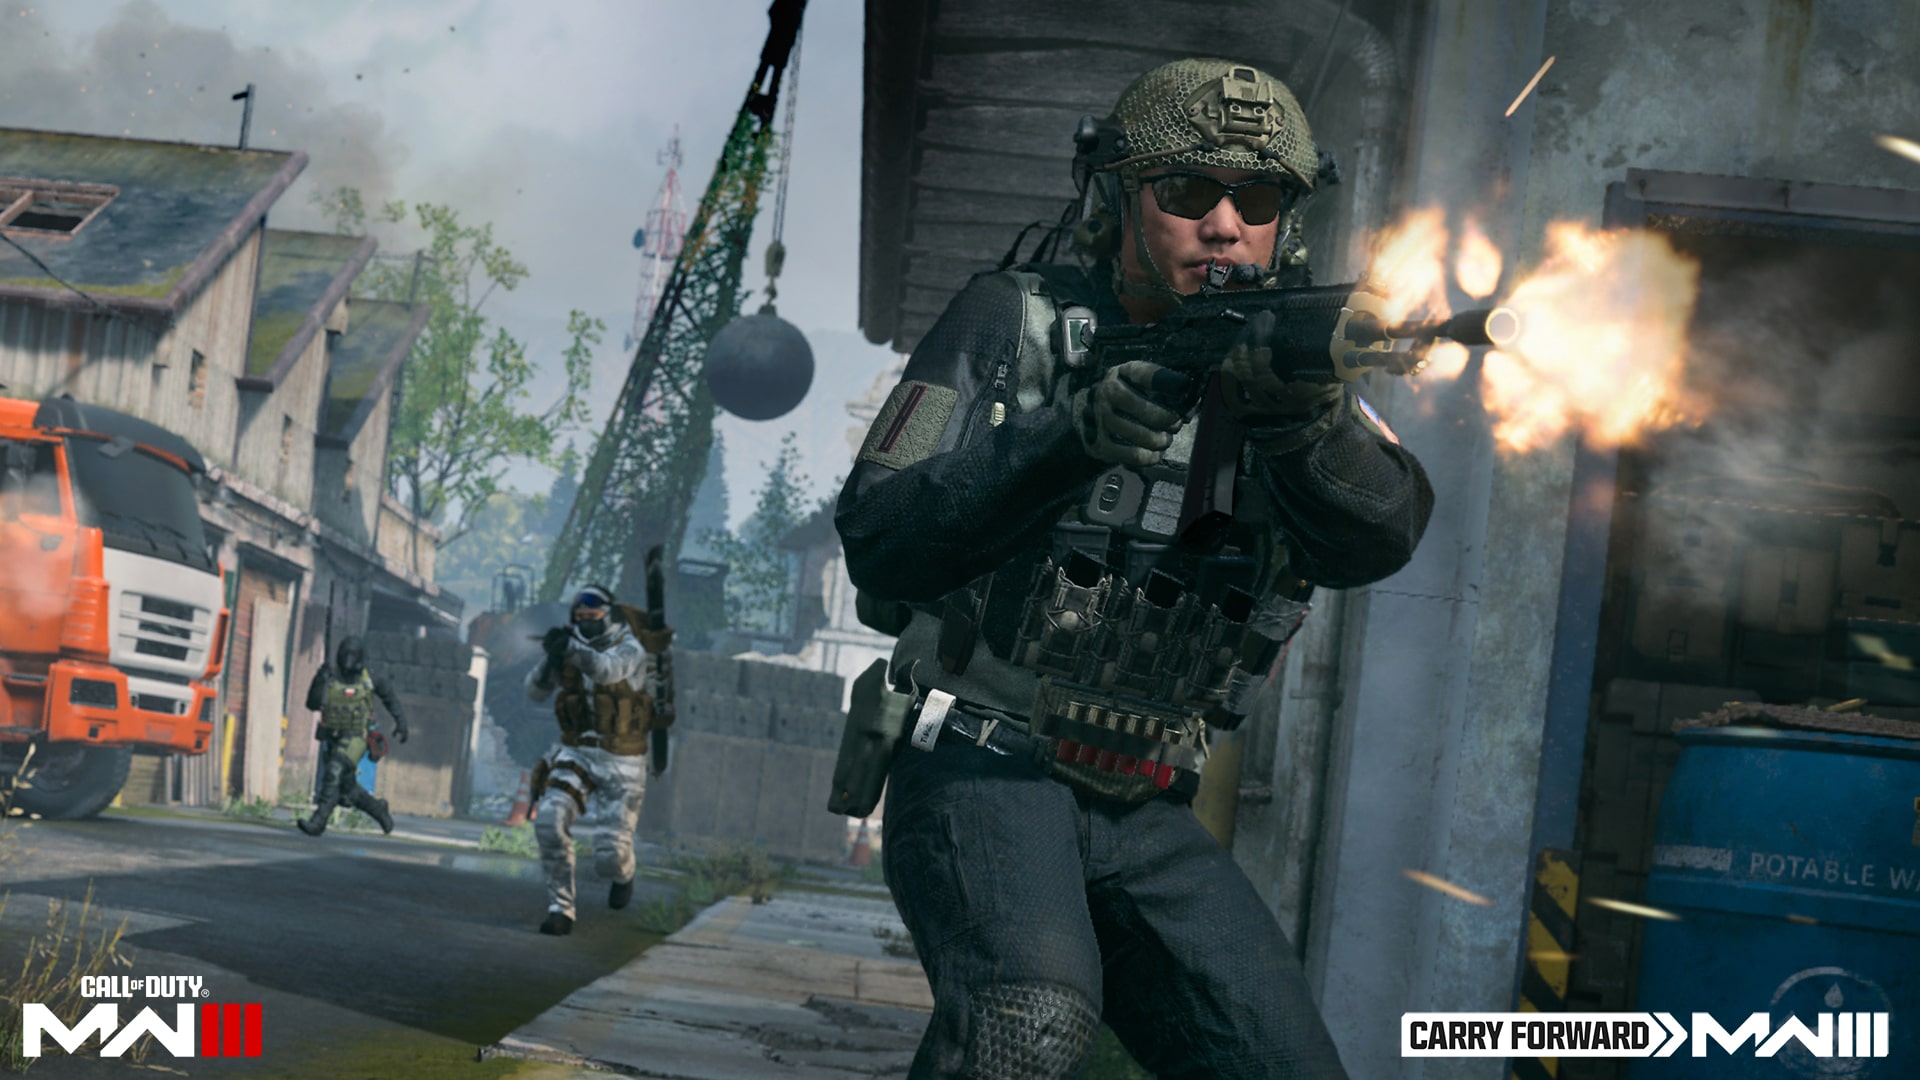 Call of Duty Modern Warfare 3 System Requirements, Trailer, Gameplay and  More - News